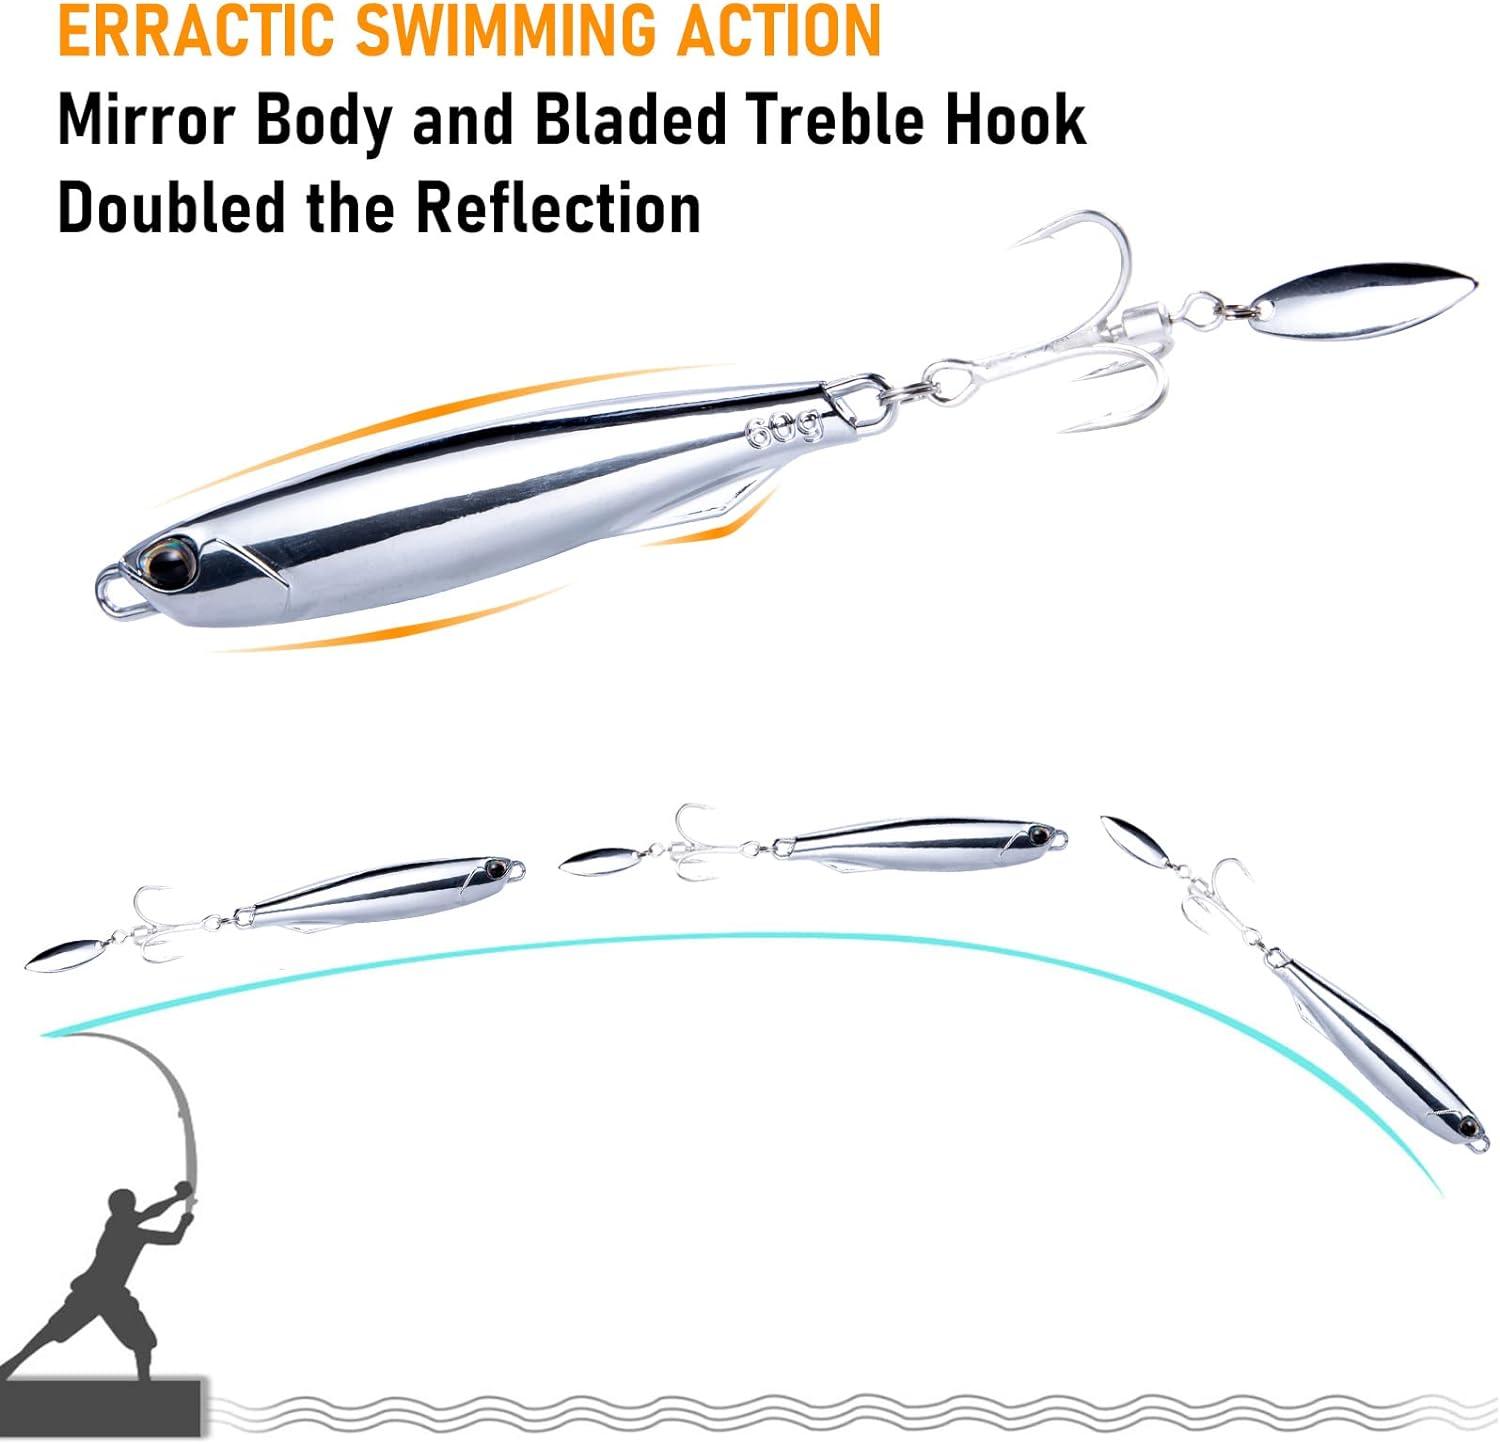  Doctor Spoons Fishing Lures Series - Made in USA - Saltwater &  Freshwater - Eagle Claw Hook - Walleye, Bass, Northern, Pike, Salmon,  Trout, Striper - Casting, Jigging, Trolling, 3 Pack : Sports & Outdoors